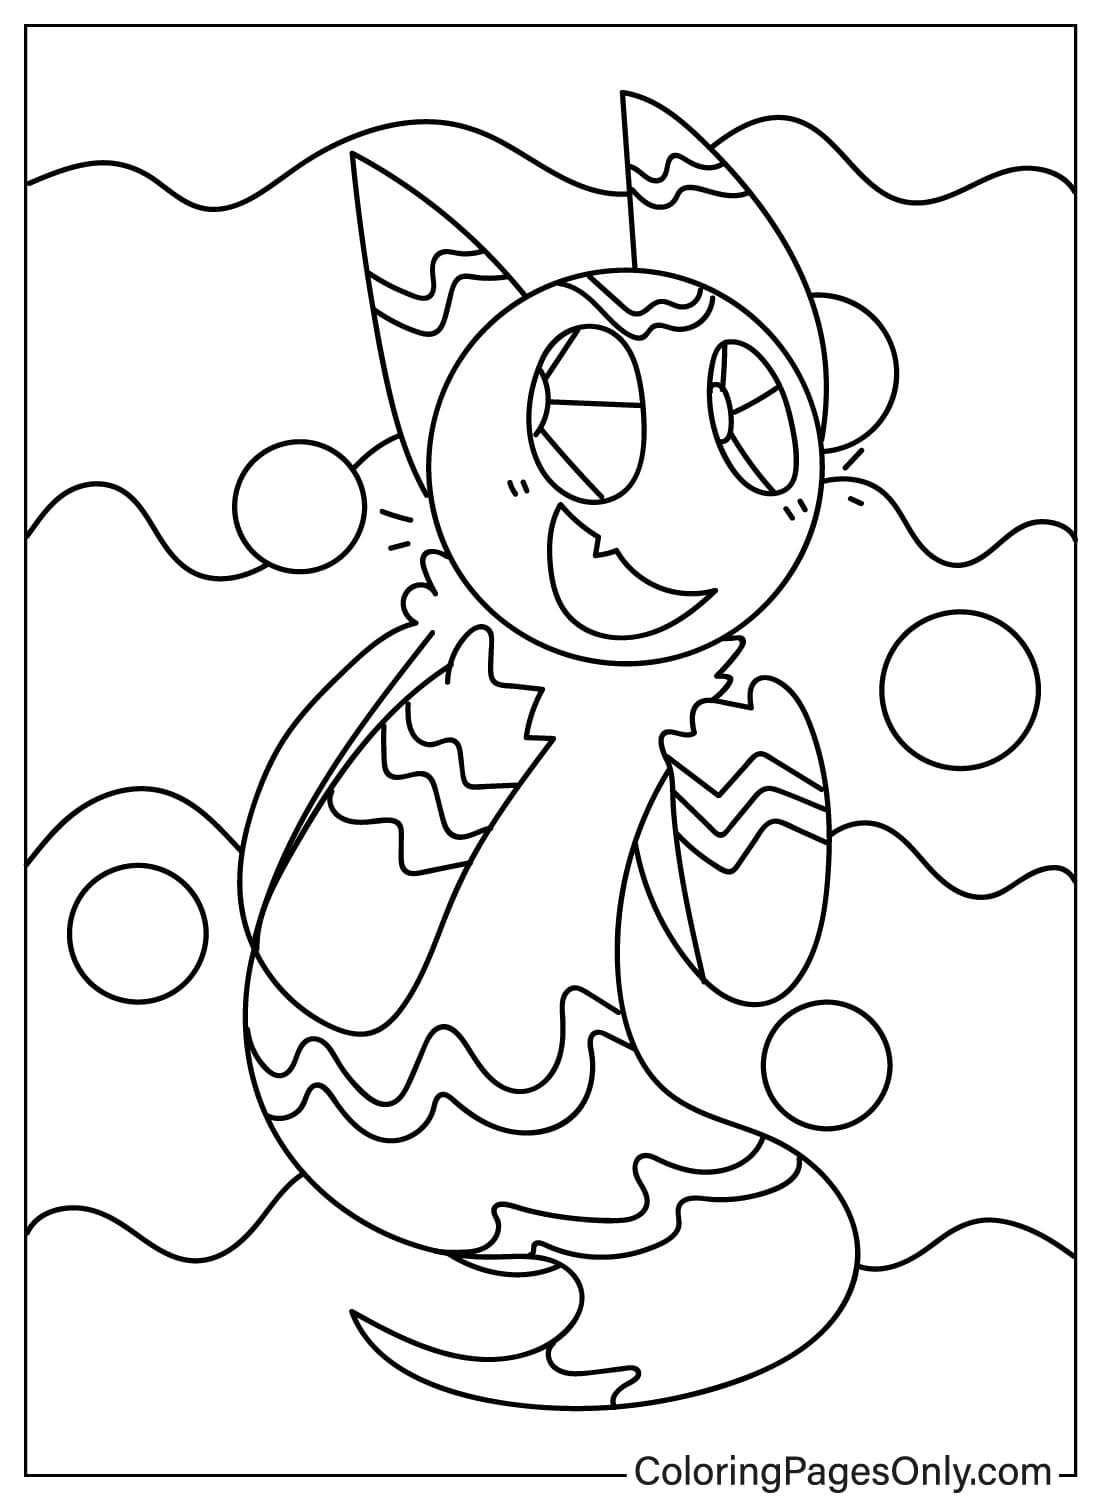 Ghazt Coloring Page Free Printable from Ghazt